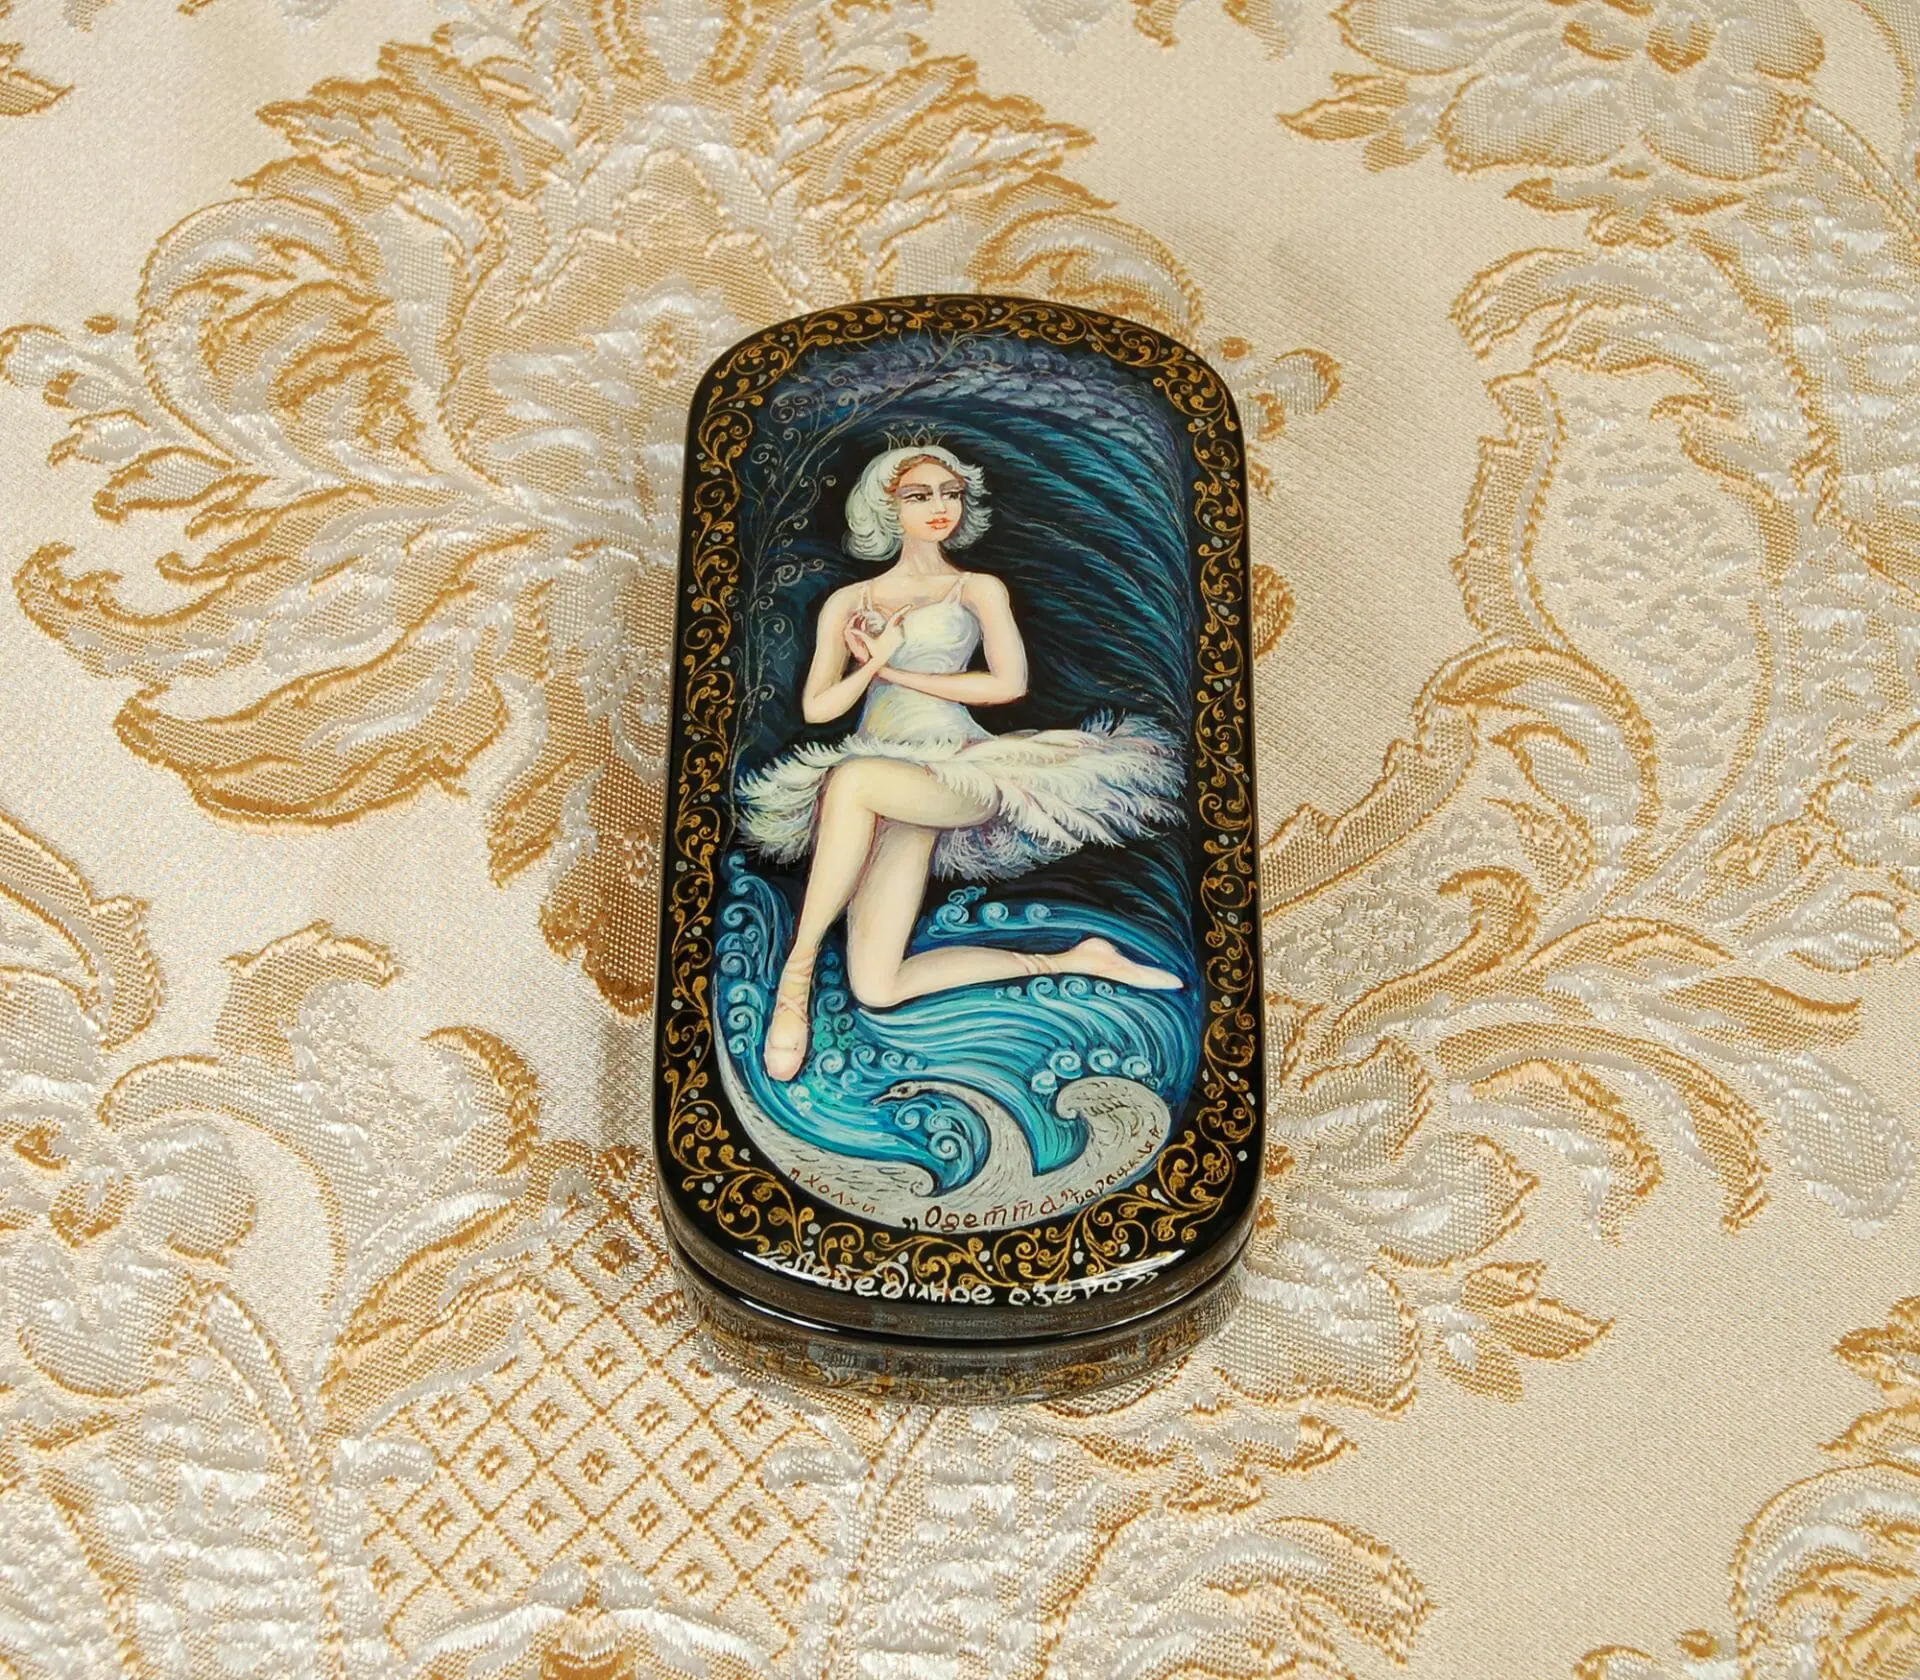 Odette ballerina lacquer box painted Swan Lake ballet